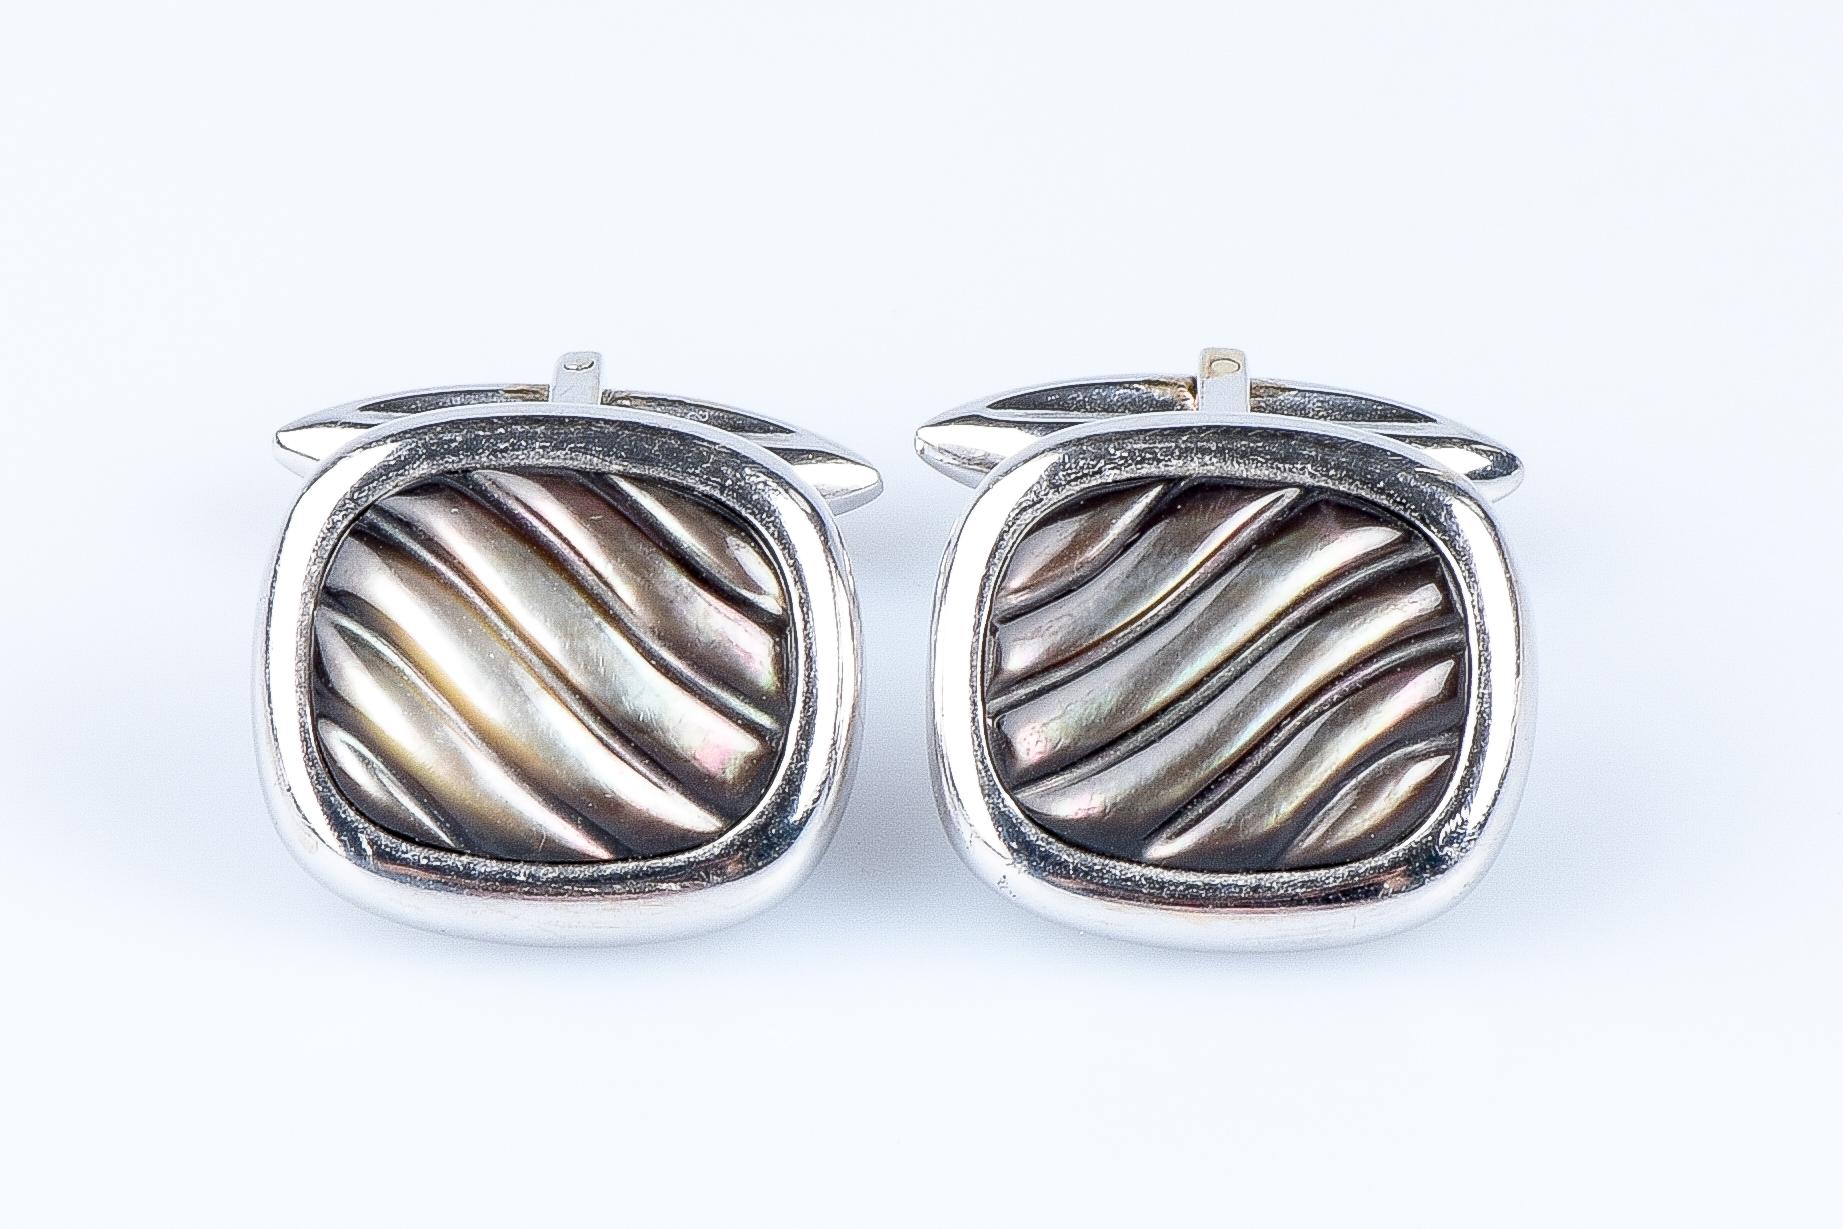 Beautiful Haute Joaillerie 18 carat white gold cufflinks designed with two sculpted mother of pearls weighing 8.00 carats. 

Quality of the diamond
Color : Brown
Clarity : Opaque

Weight: 14.82 gr. 

Dimensions : 2.25 x 1.68 x 1.50 x cm

Jewel